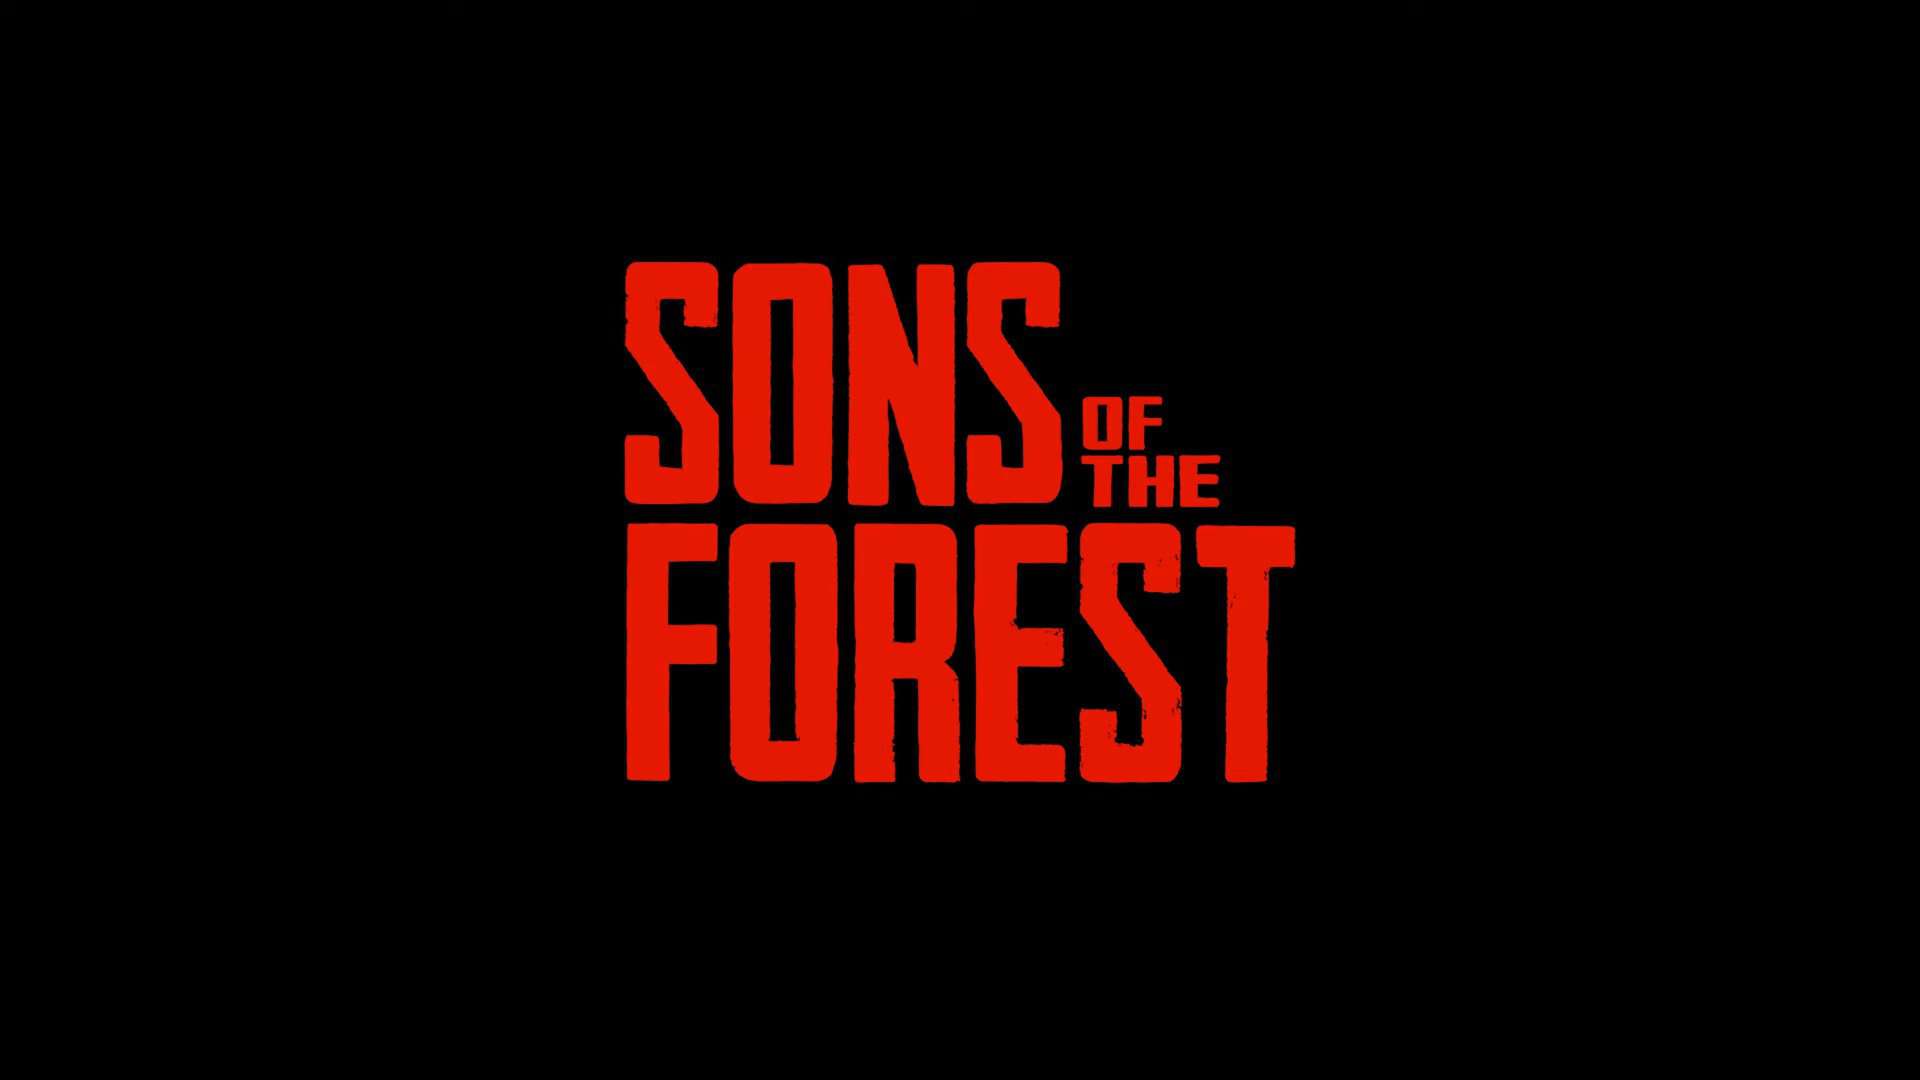 Is Sons of the Forest Steam Deck compatible?